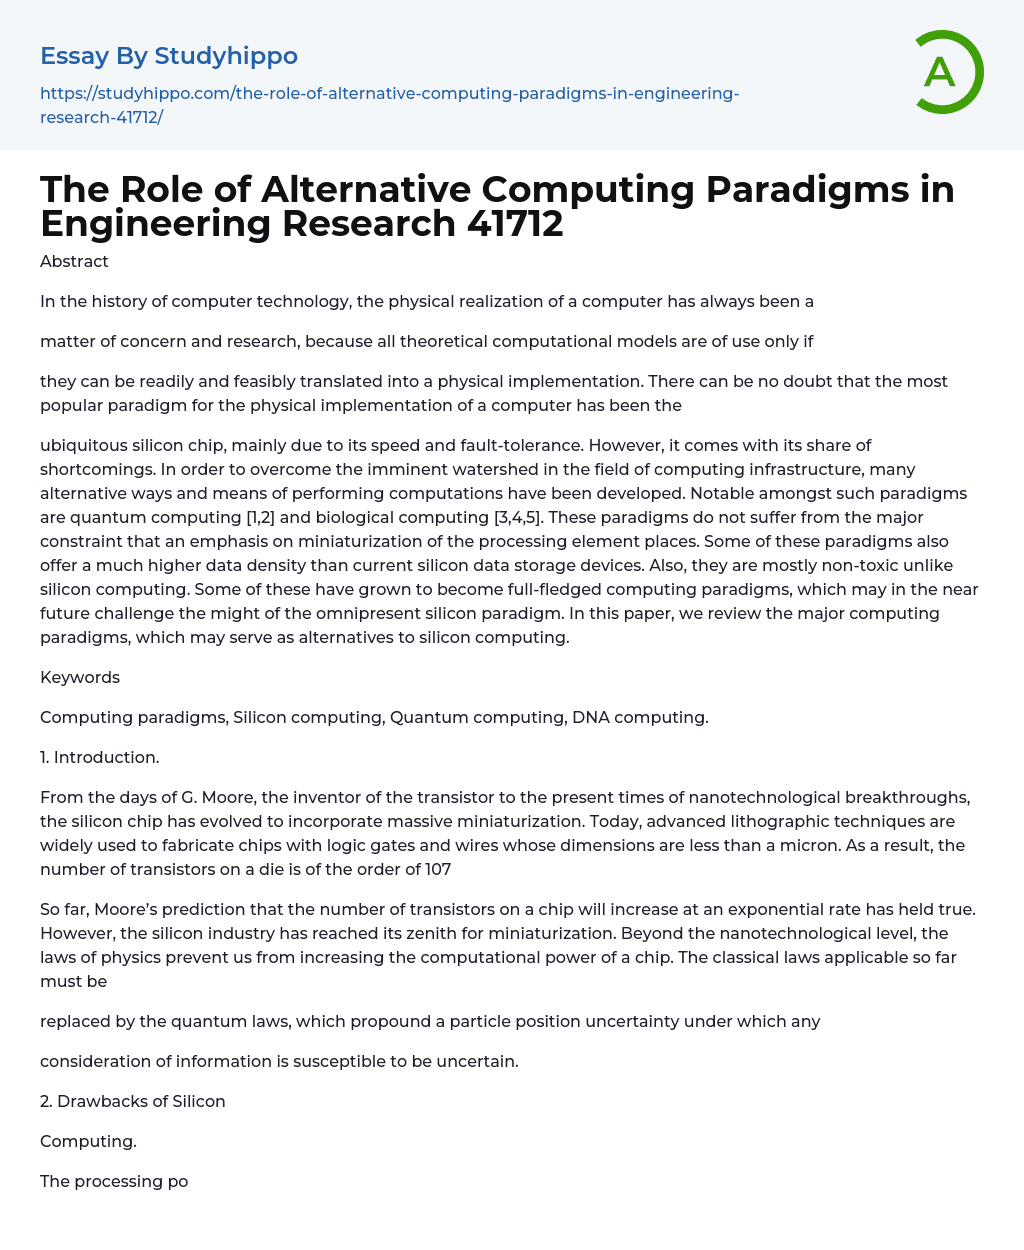 The Role of Alternative Computing Paradigms in Engineering Research 41712 Essay Example